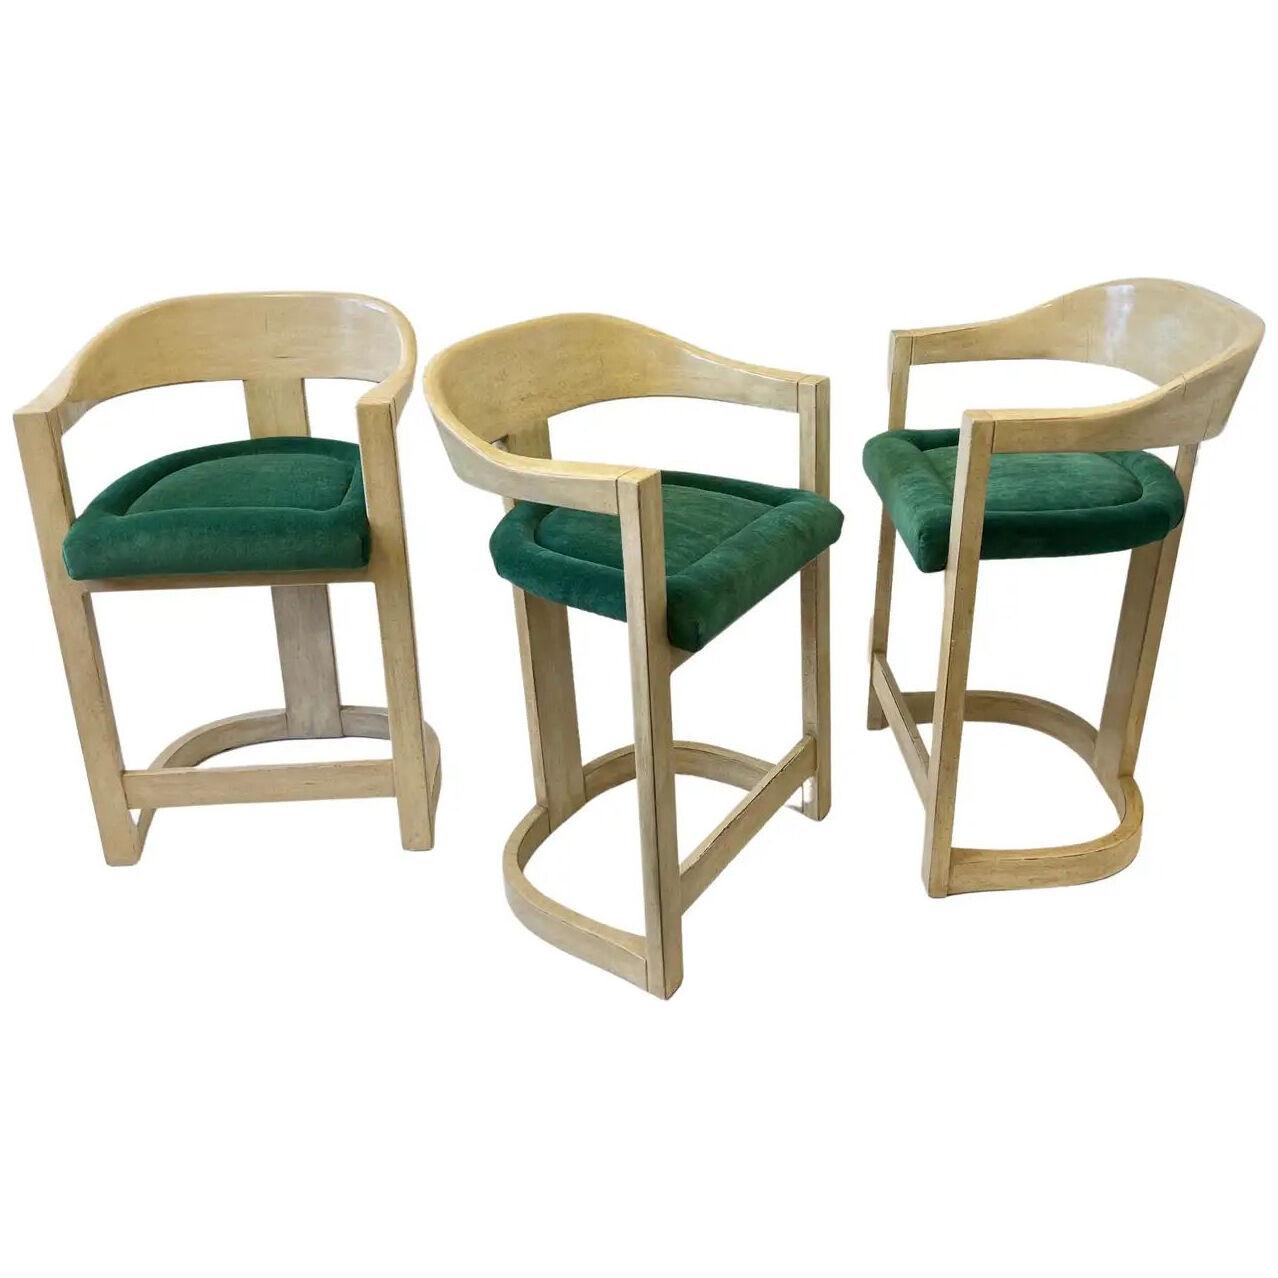 Set of Three Lacquered and Emerald Green Mohair Barstools by Karl Springer